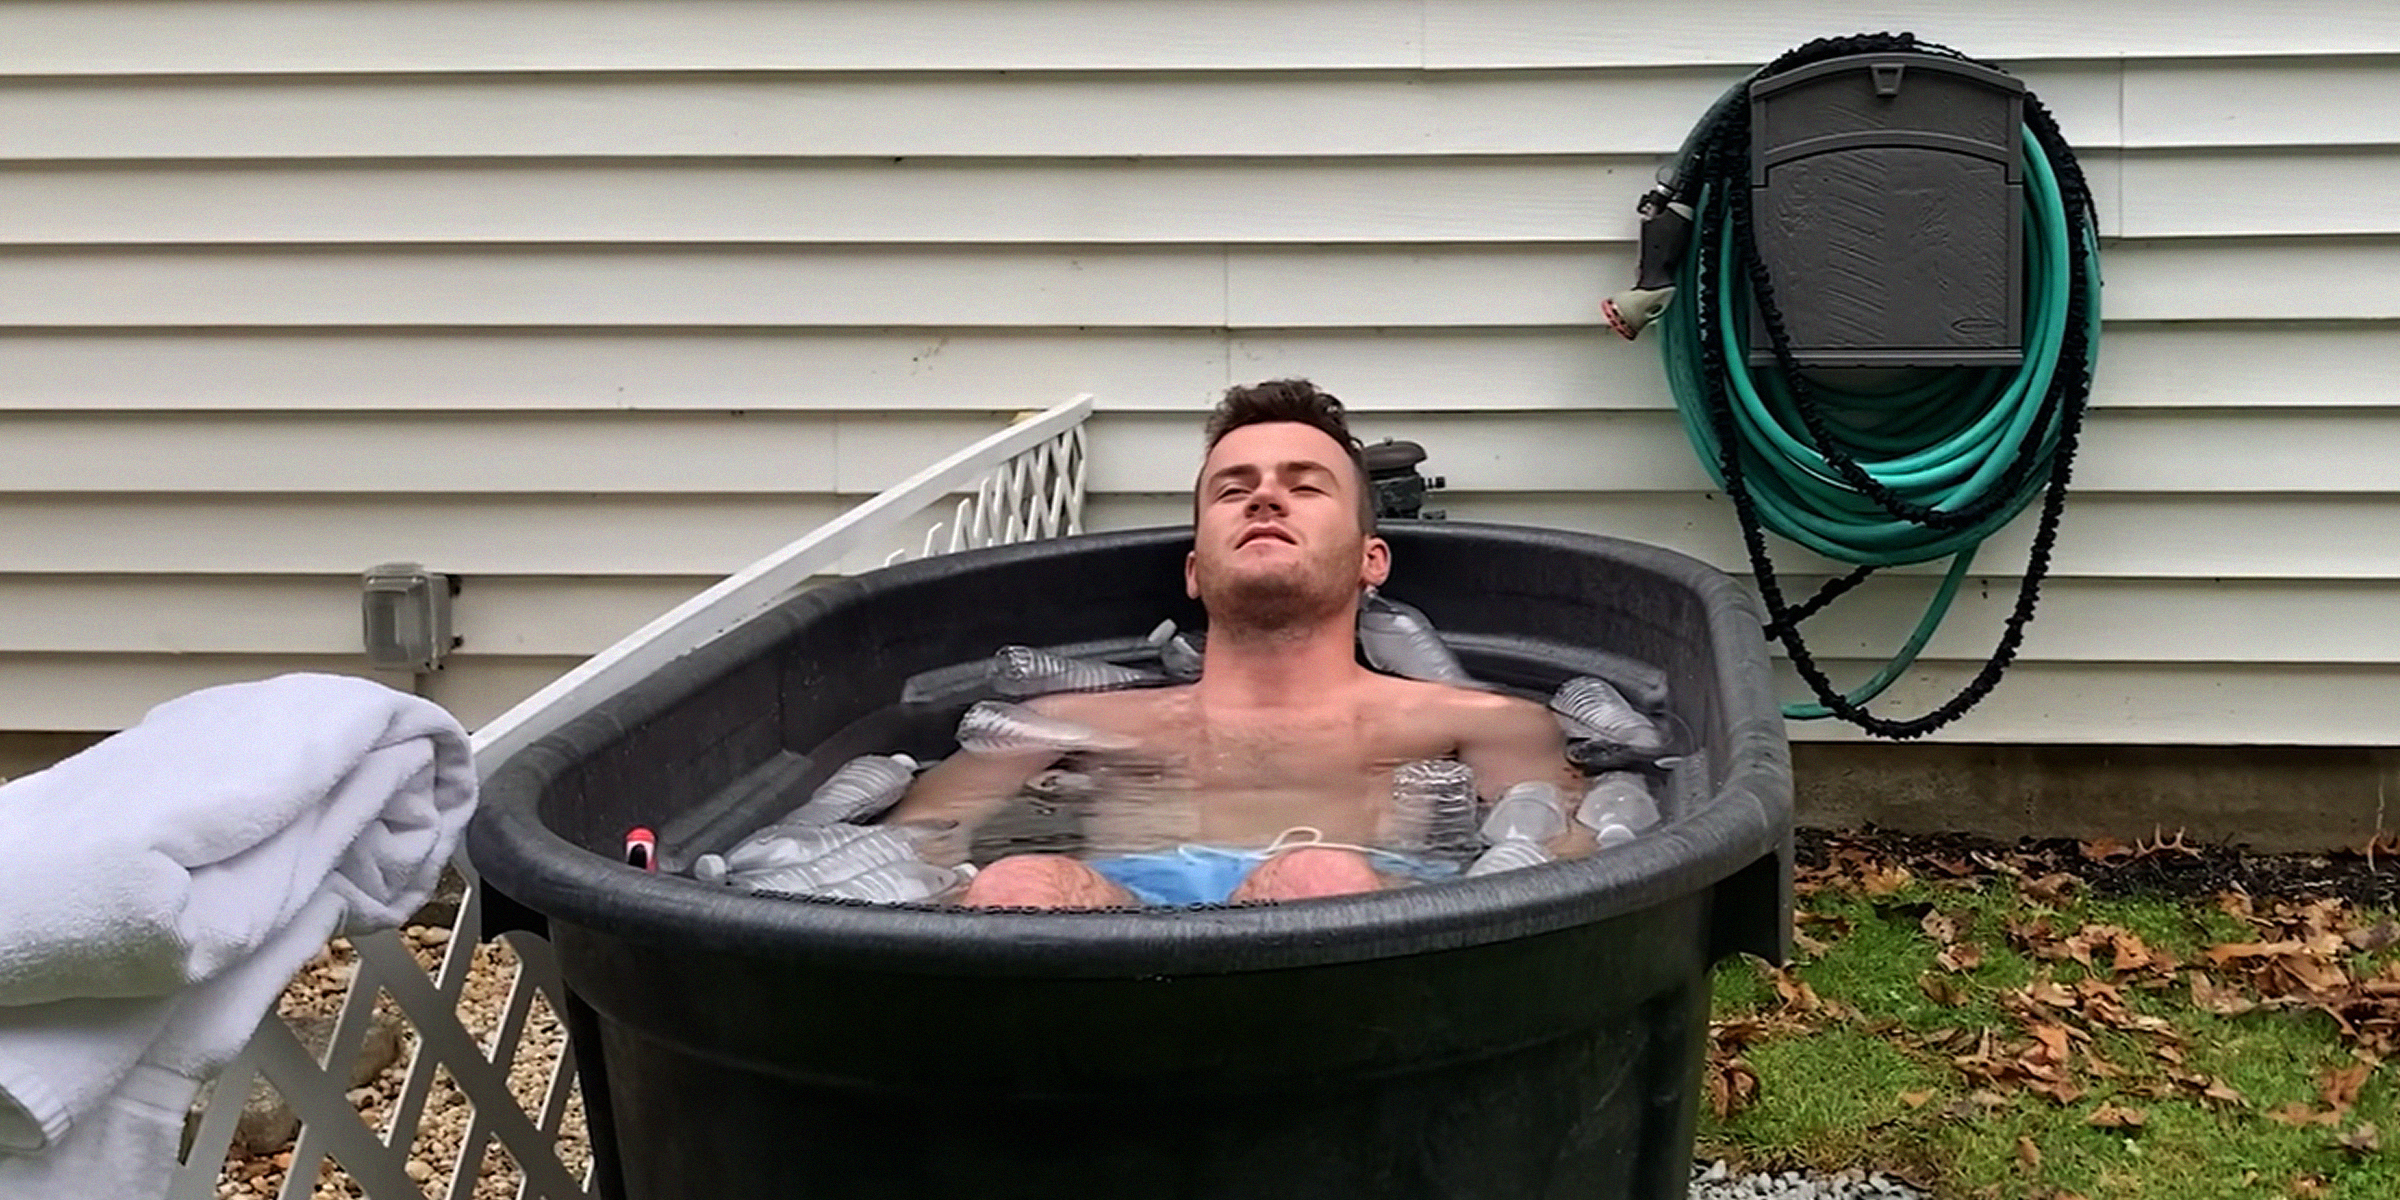 A man in a DIY cold plunge container | Source: YouTube.com/@GetAheadWithNick